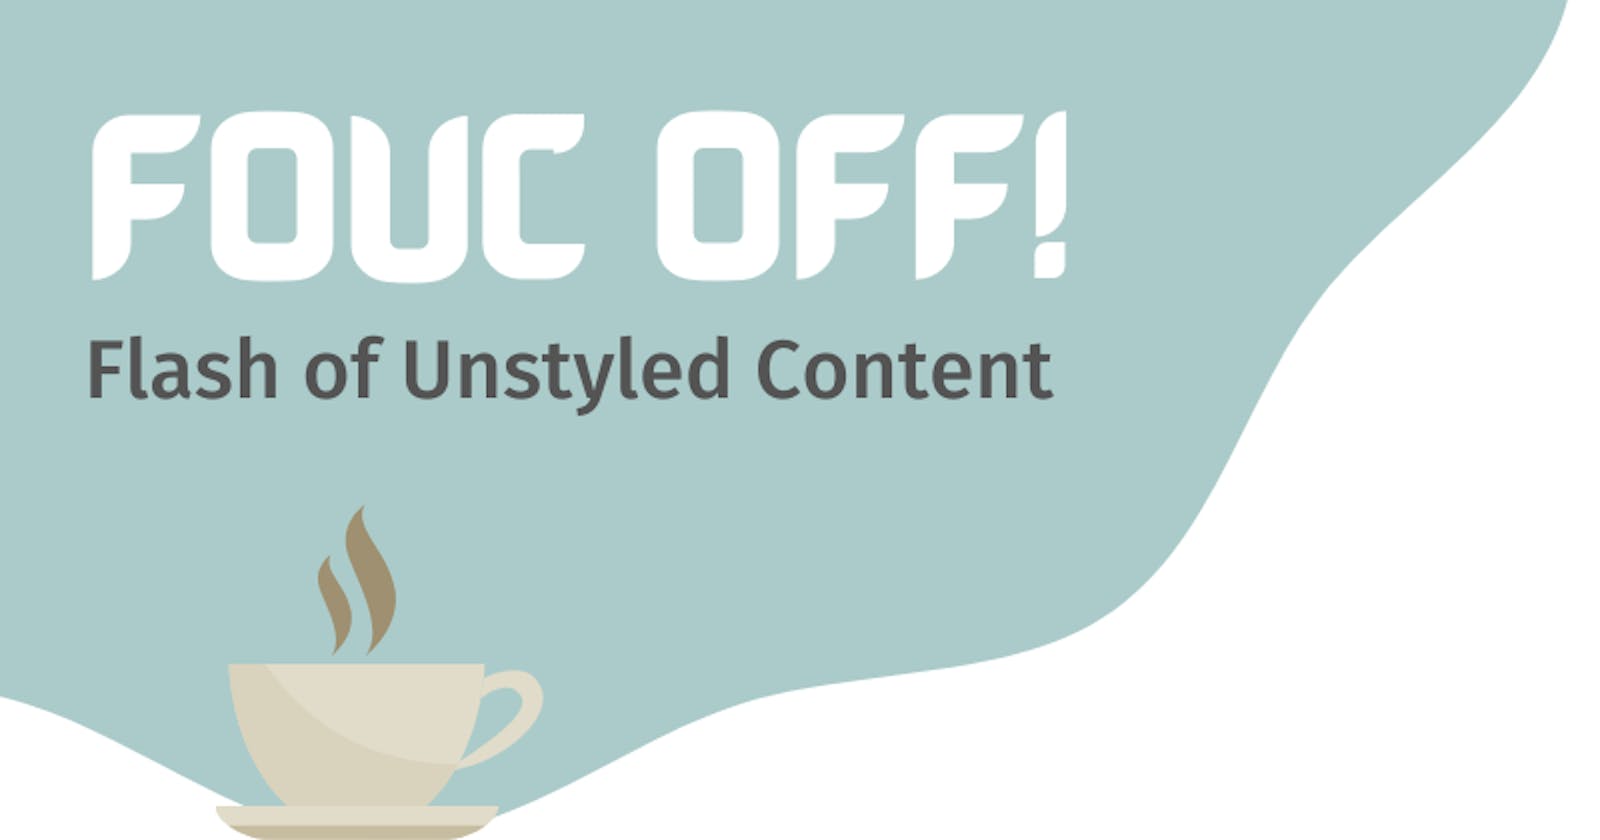 What the FOUC is happening: Flash of Unstyled Content